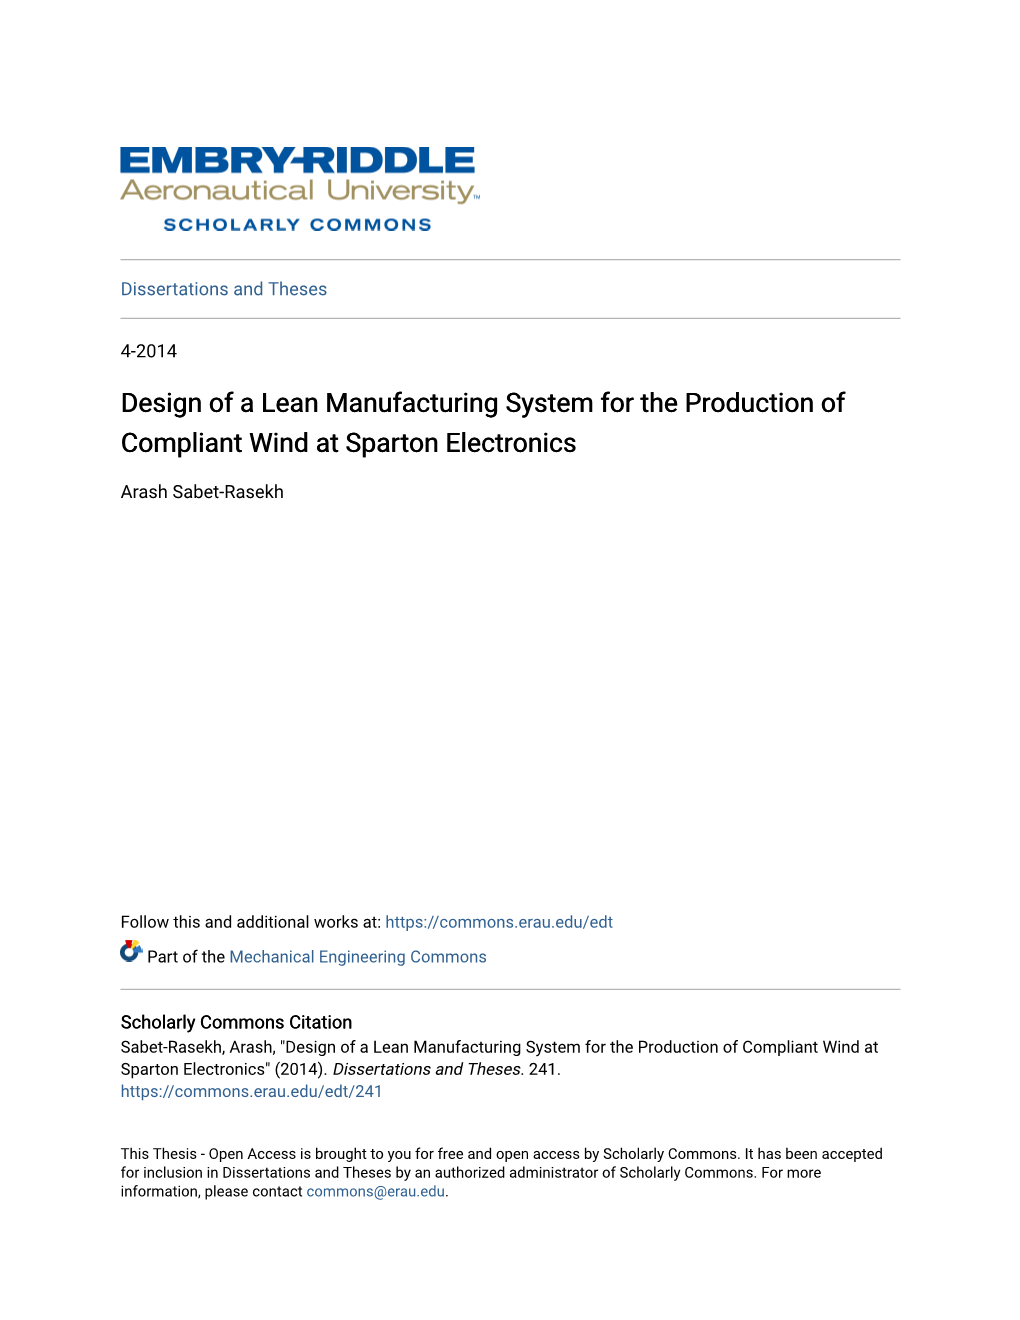 Design of a Lean Manufacturing System for the Production of Compliant Wind at Sparton Electronics